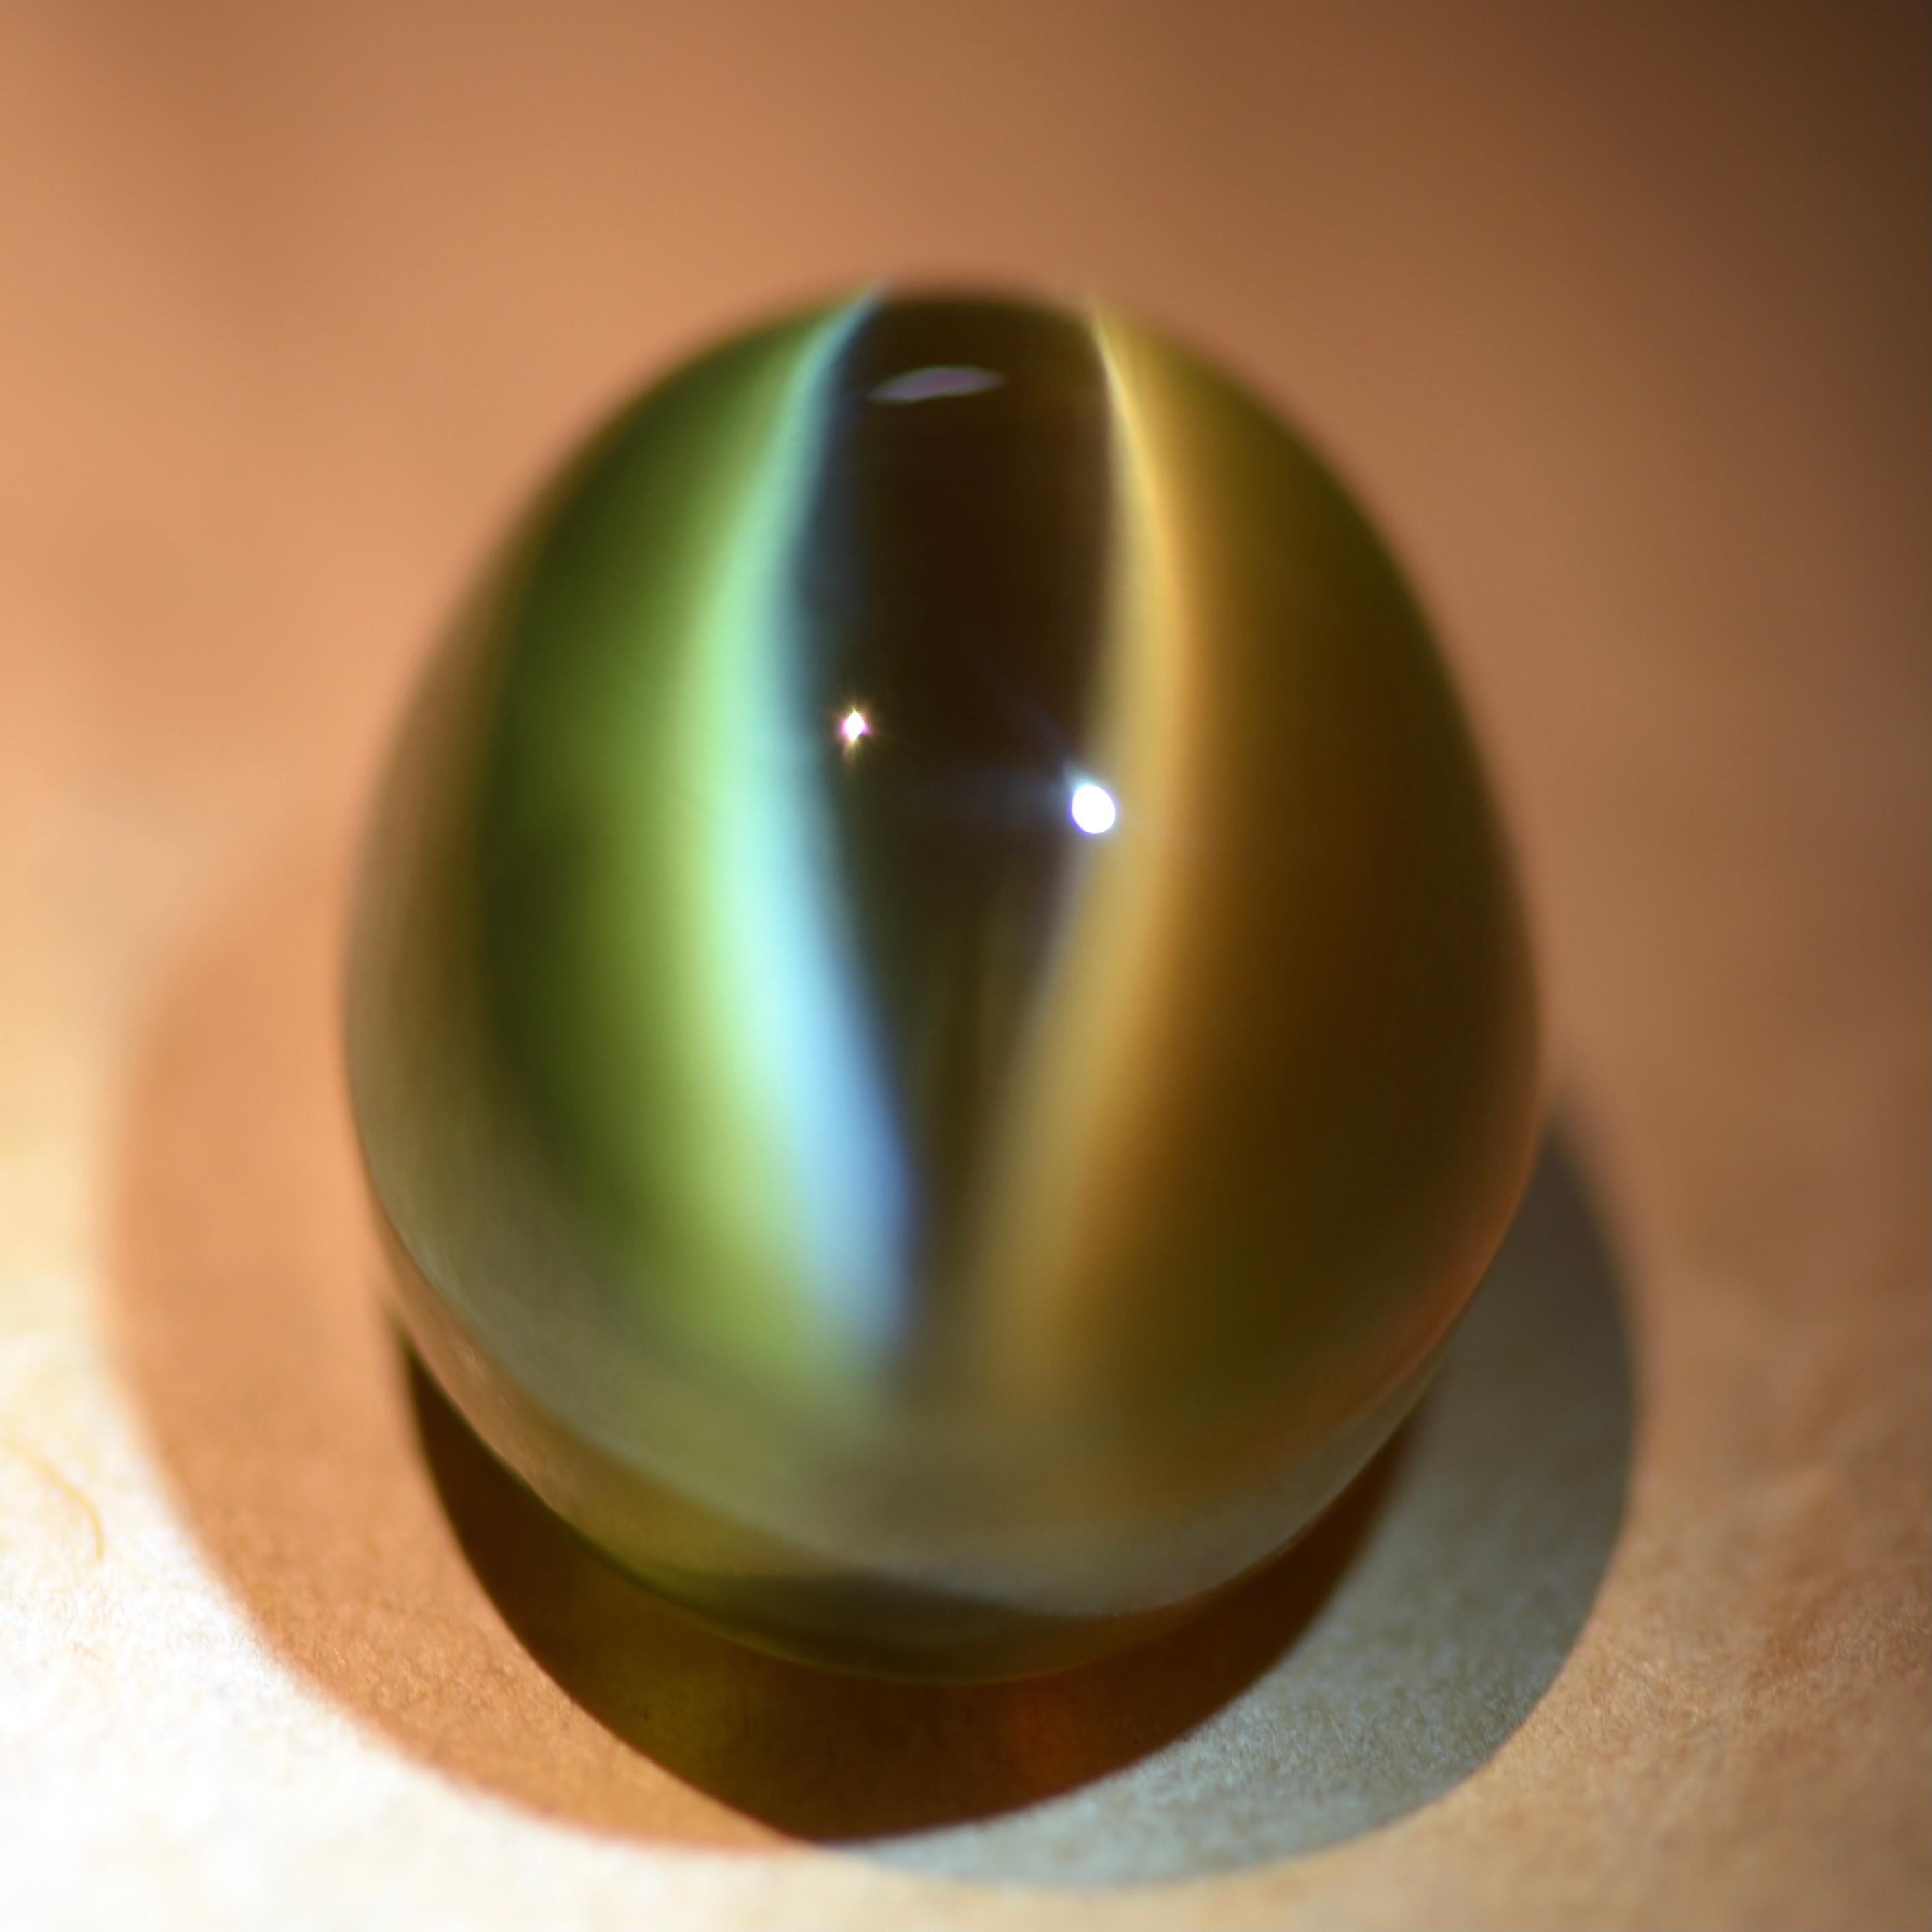 Only a small number of gemstones have phenomenal like the ability to show a sharp line that moves along with the light beneath the surface of the stone. This effect is called cat's eye effect. 
And chrysoberyl is the best known gem material that